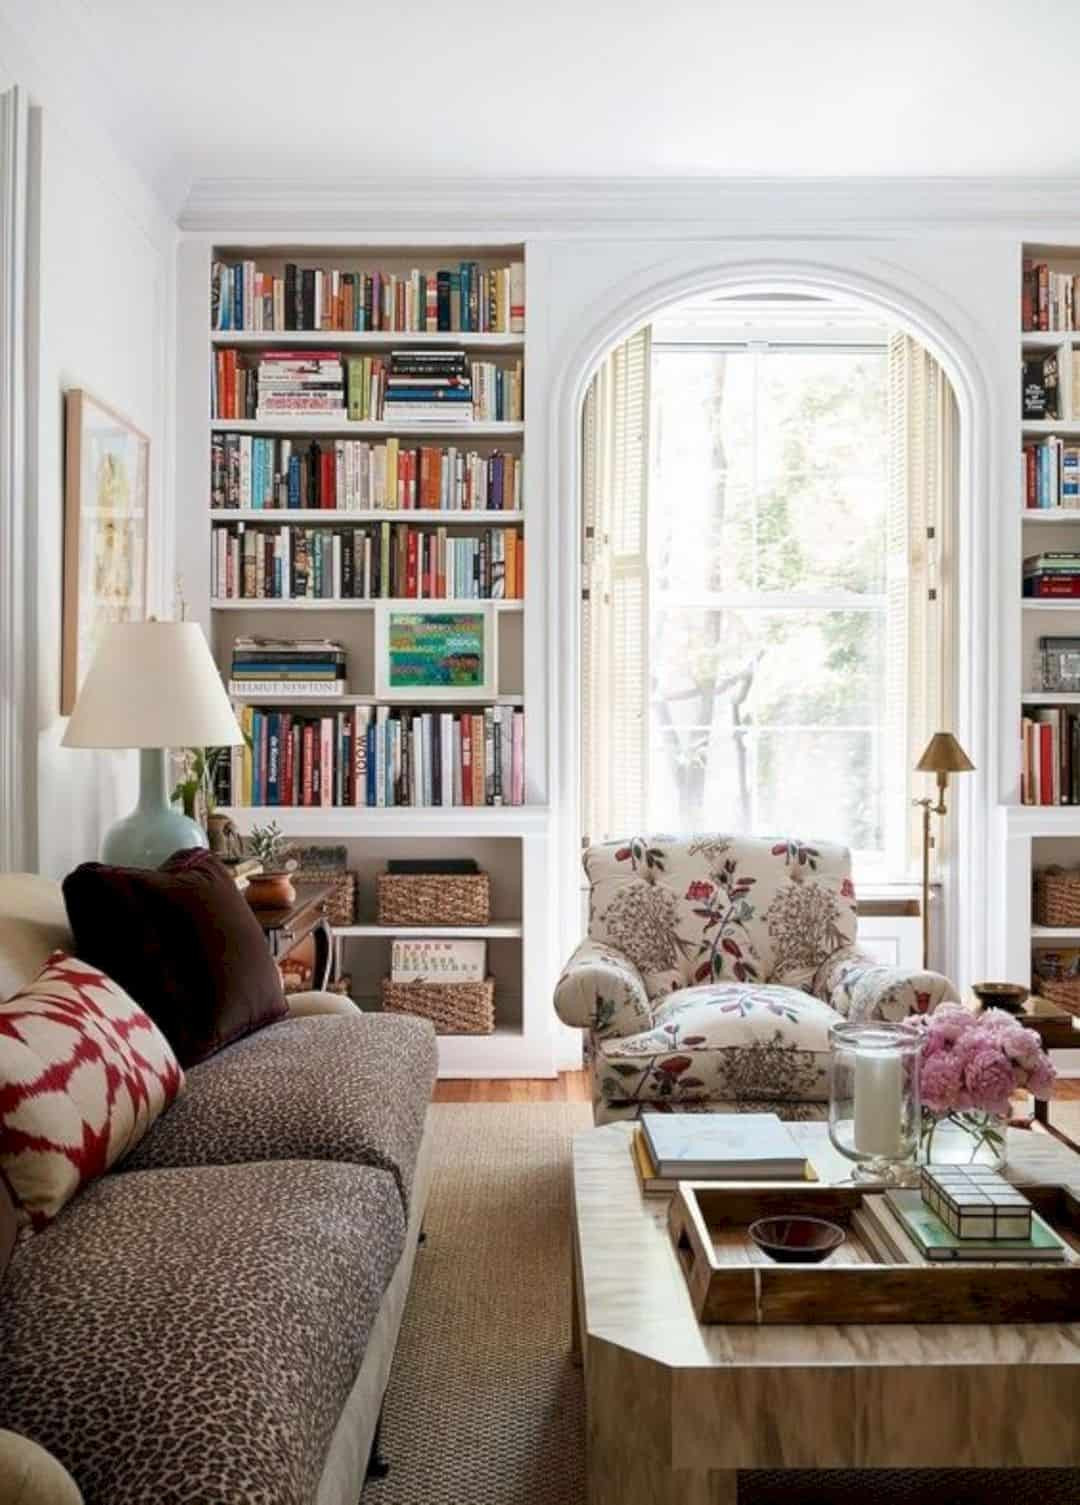 Small Space Living Room Furniture
 16 Top Small Living Room Furniture Ideas Futurist